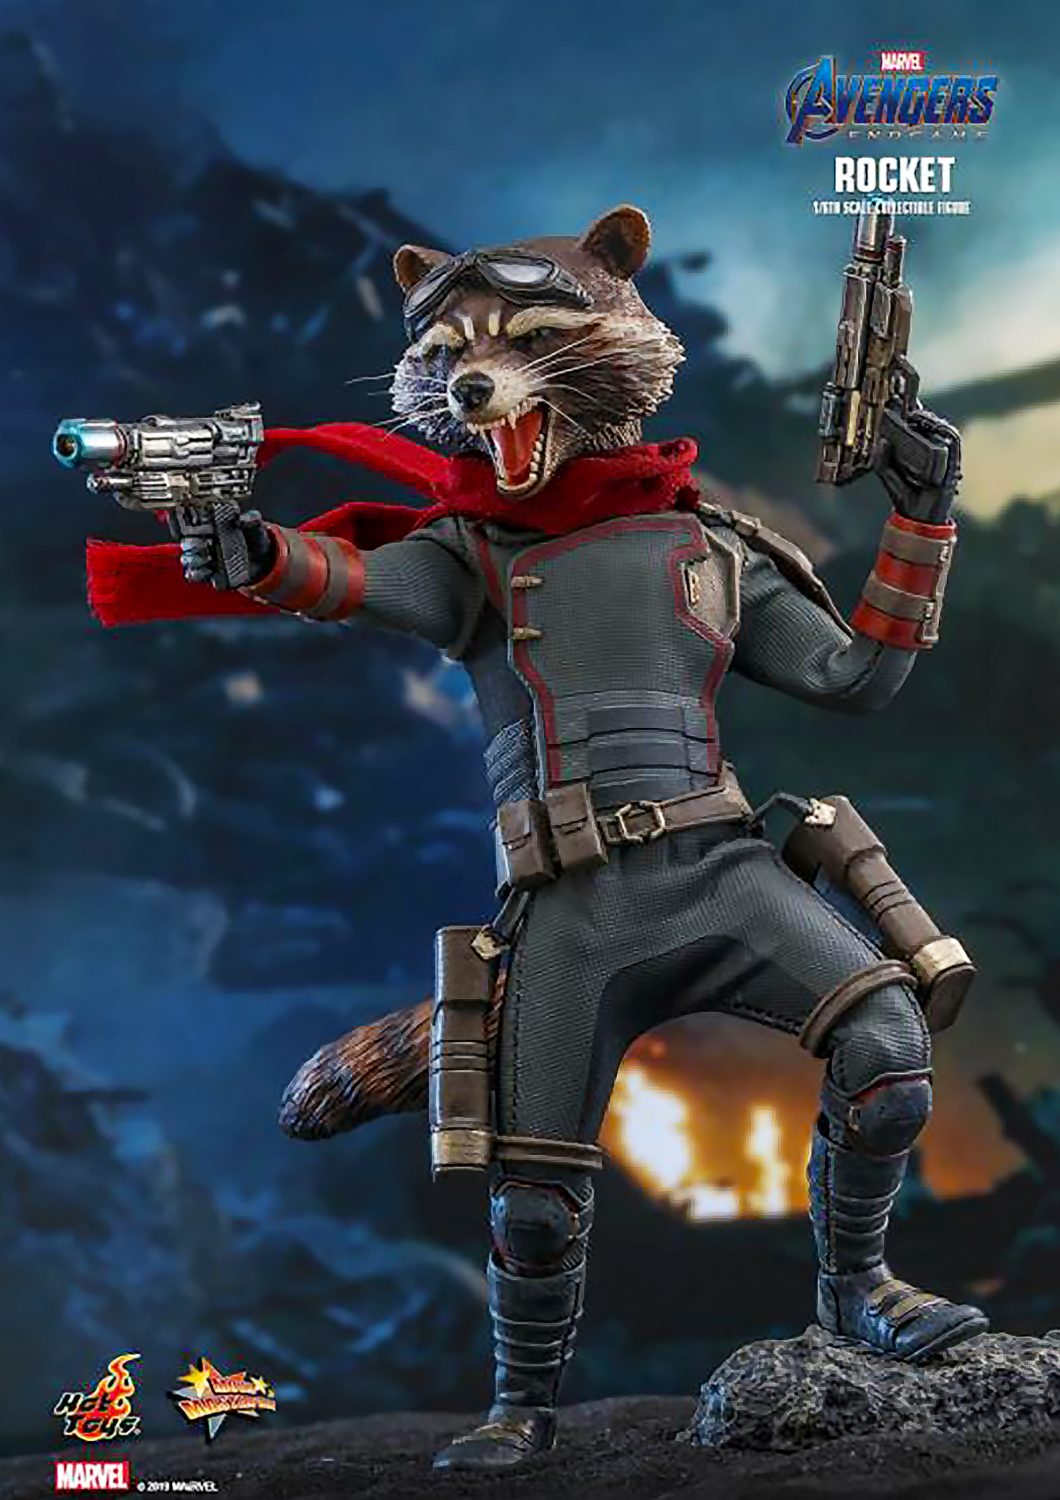 HOT TOYS MARVEL AVENGERS: ENDGAME ROCKET COLLECTIBLE FIGURE 1/6 MMS548 - Anotoys Collectibles